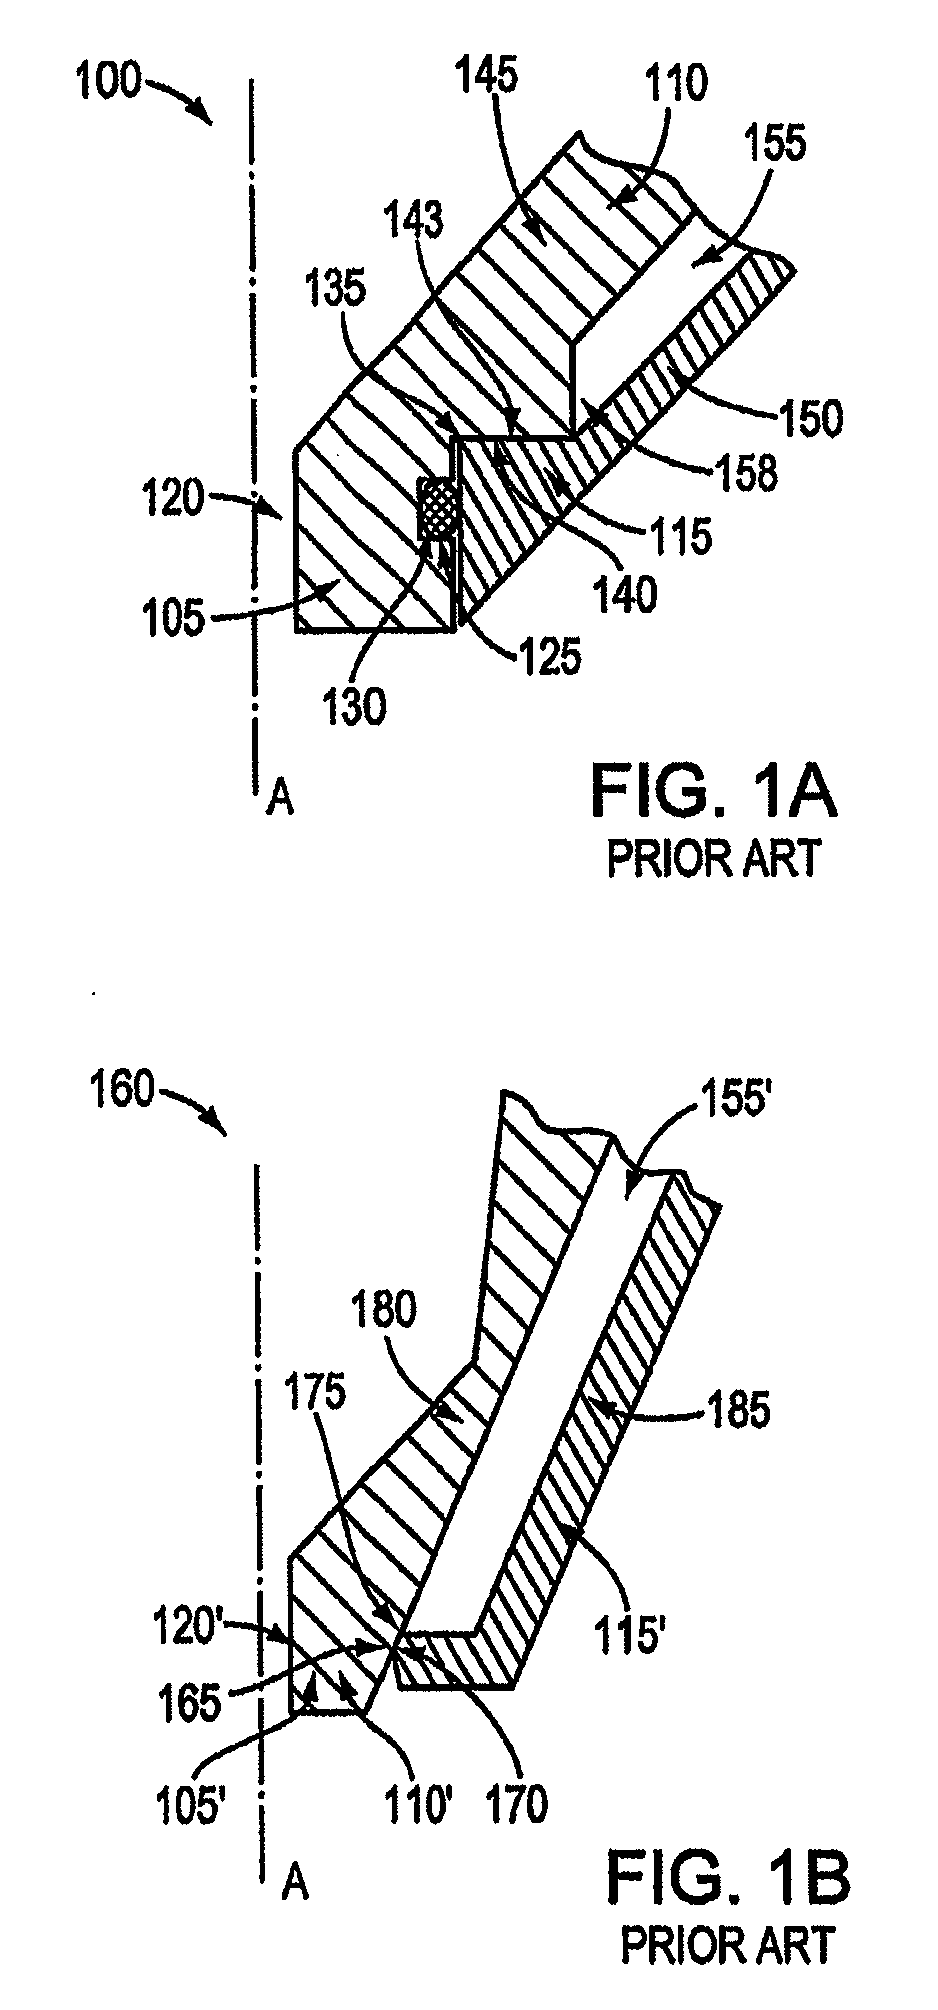 Plasma arc torch cutting component with optimized water cooling